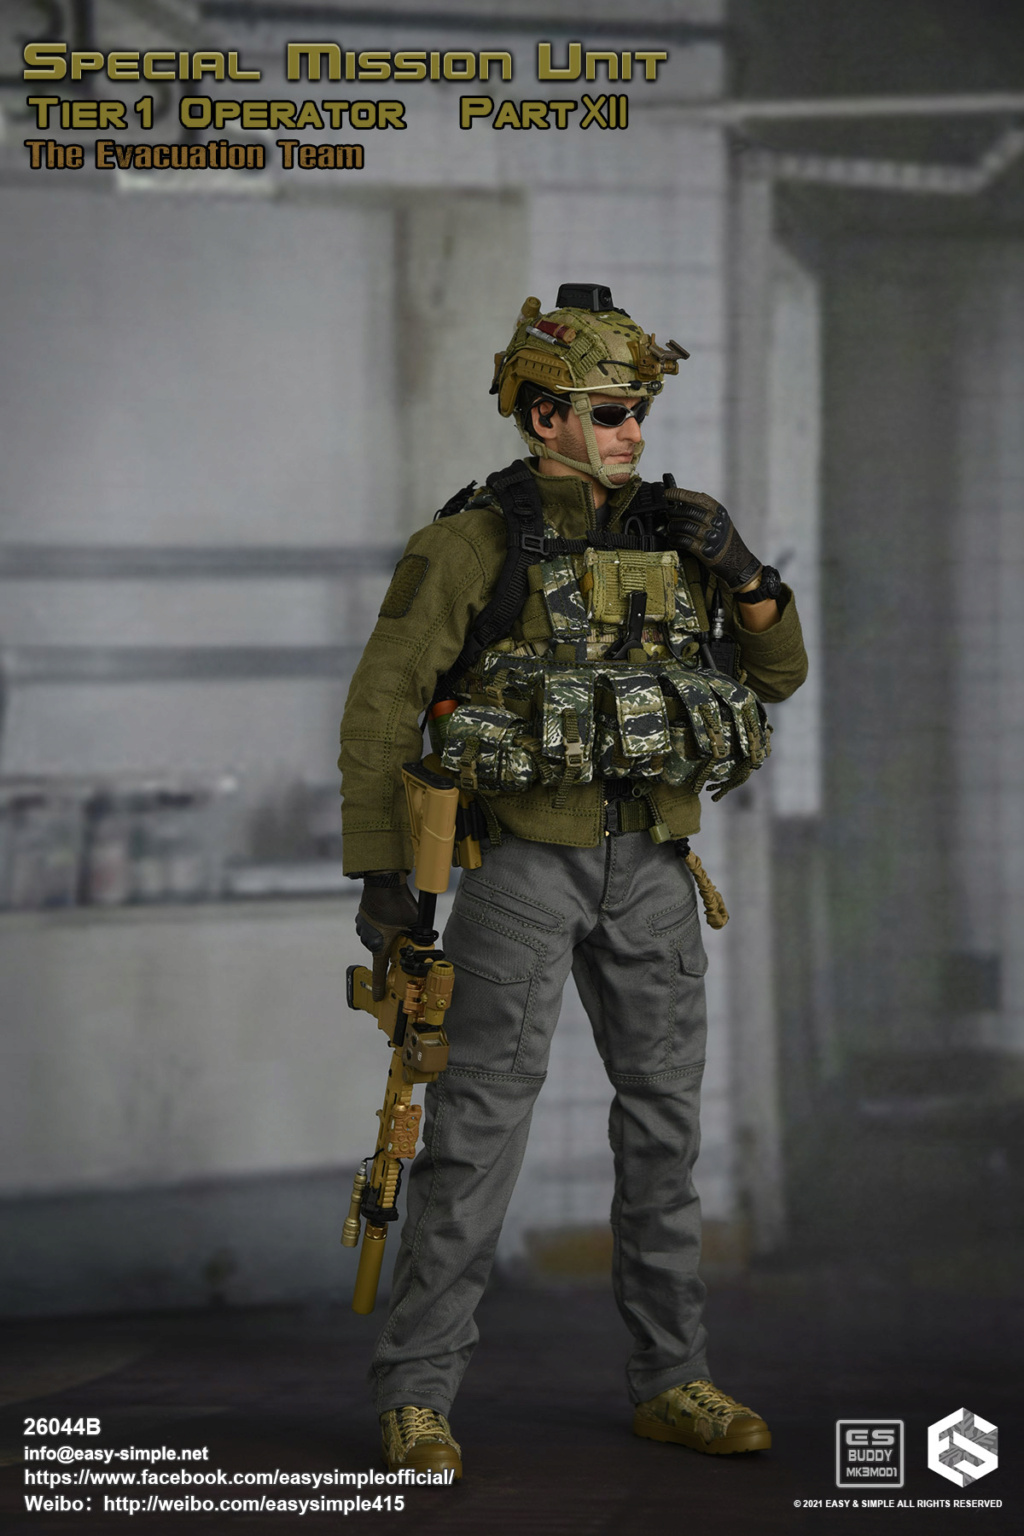 SpecialMissionUnit - NEW PRODUCT: Easy&Simple: 26044B Special Mission Unit Tier1 Operator Part XII The Evacuation Team 77220f10